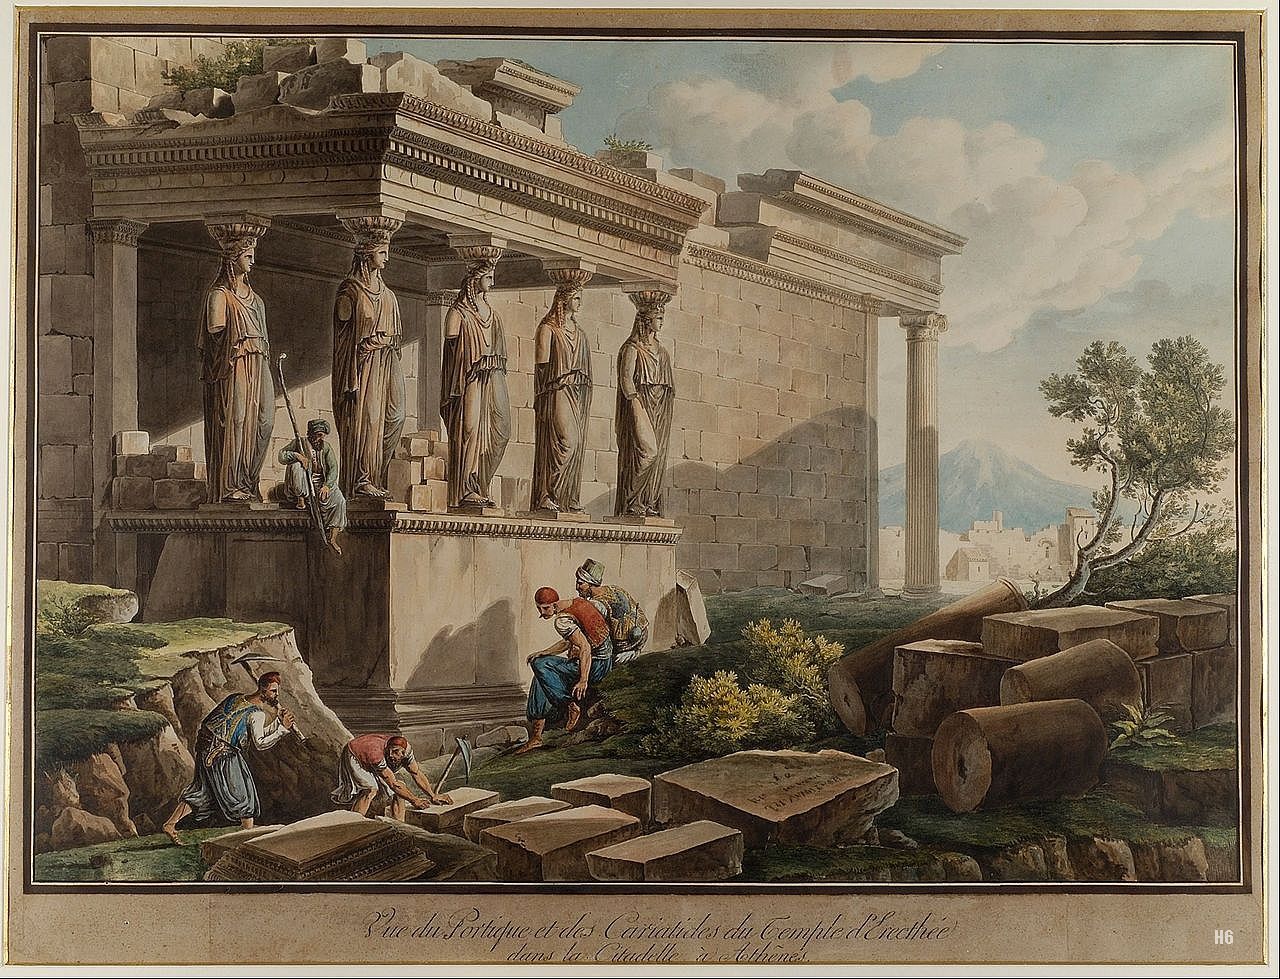 The Porch of the Caryatids on the Erectheion. 1813. Louis Francois Cassas. French 1756-1827. print.
http://hadrian6.tumblr.com